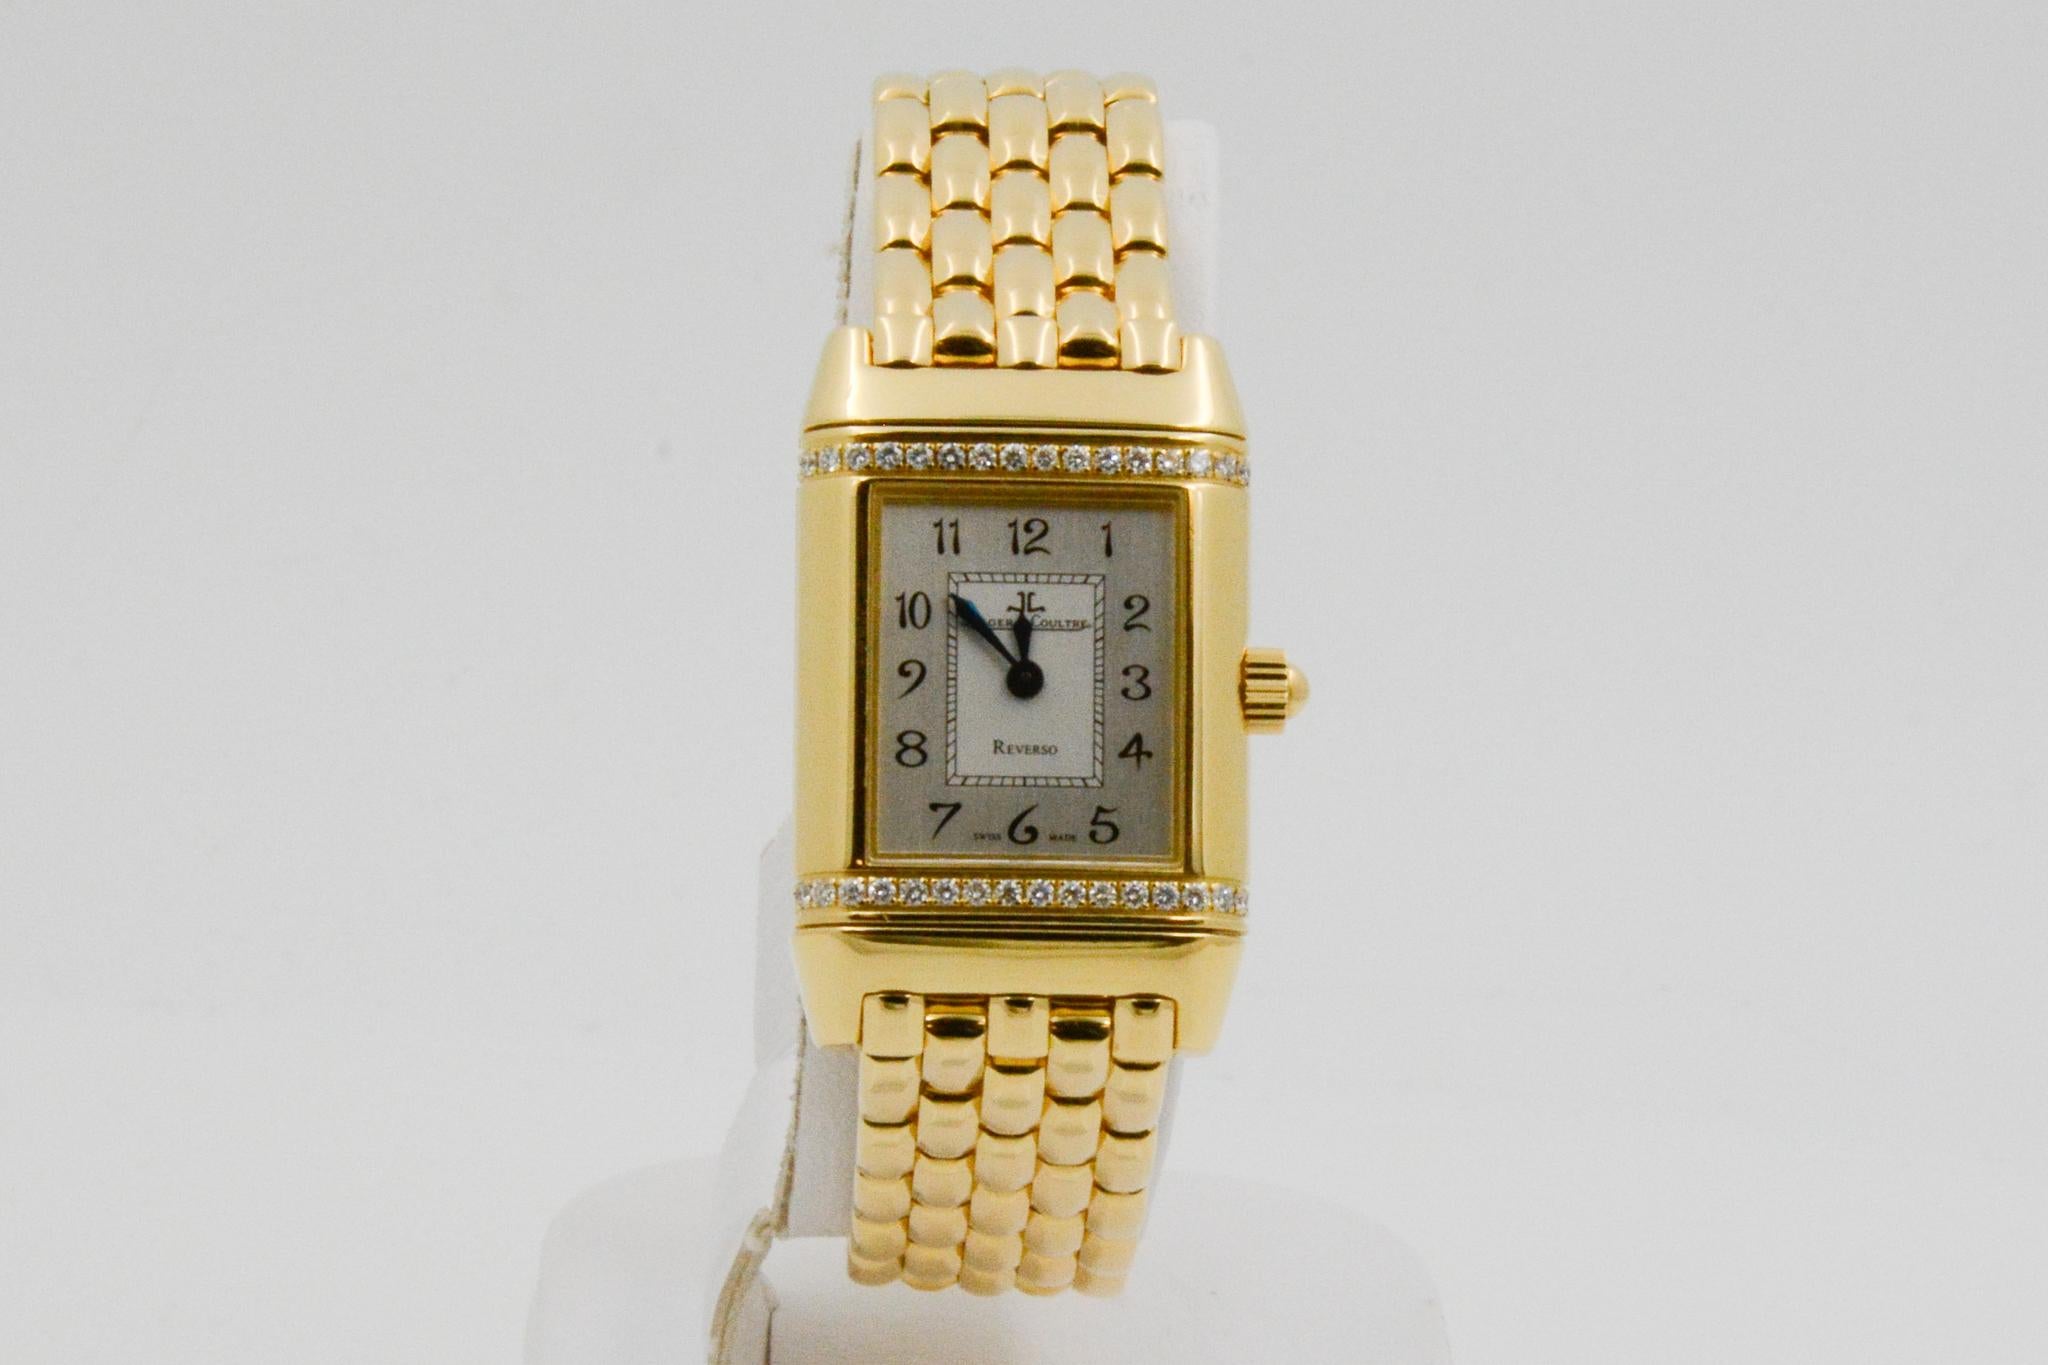 Jaeger Le-Coultre CPO Reverso
Model: Reverso 265.11.082
Movement: Quartz
Case Material: 18k yellow gold
Dial: Silver Arabic
Strap: 18k yellow gold
Circa 1997, box and papers